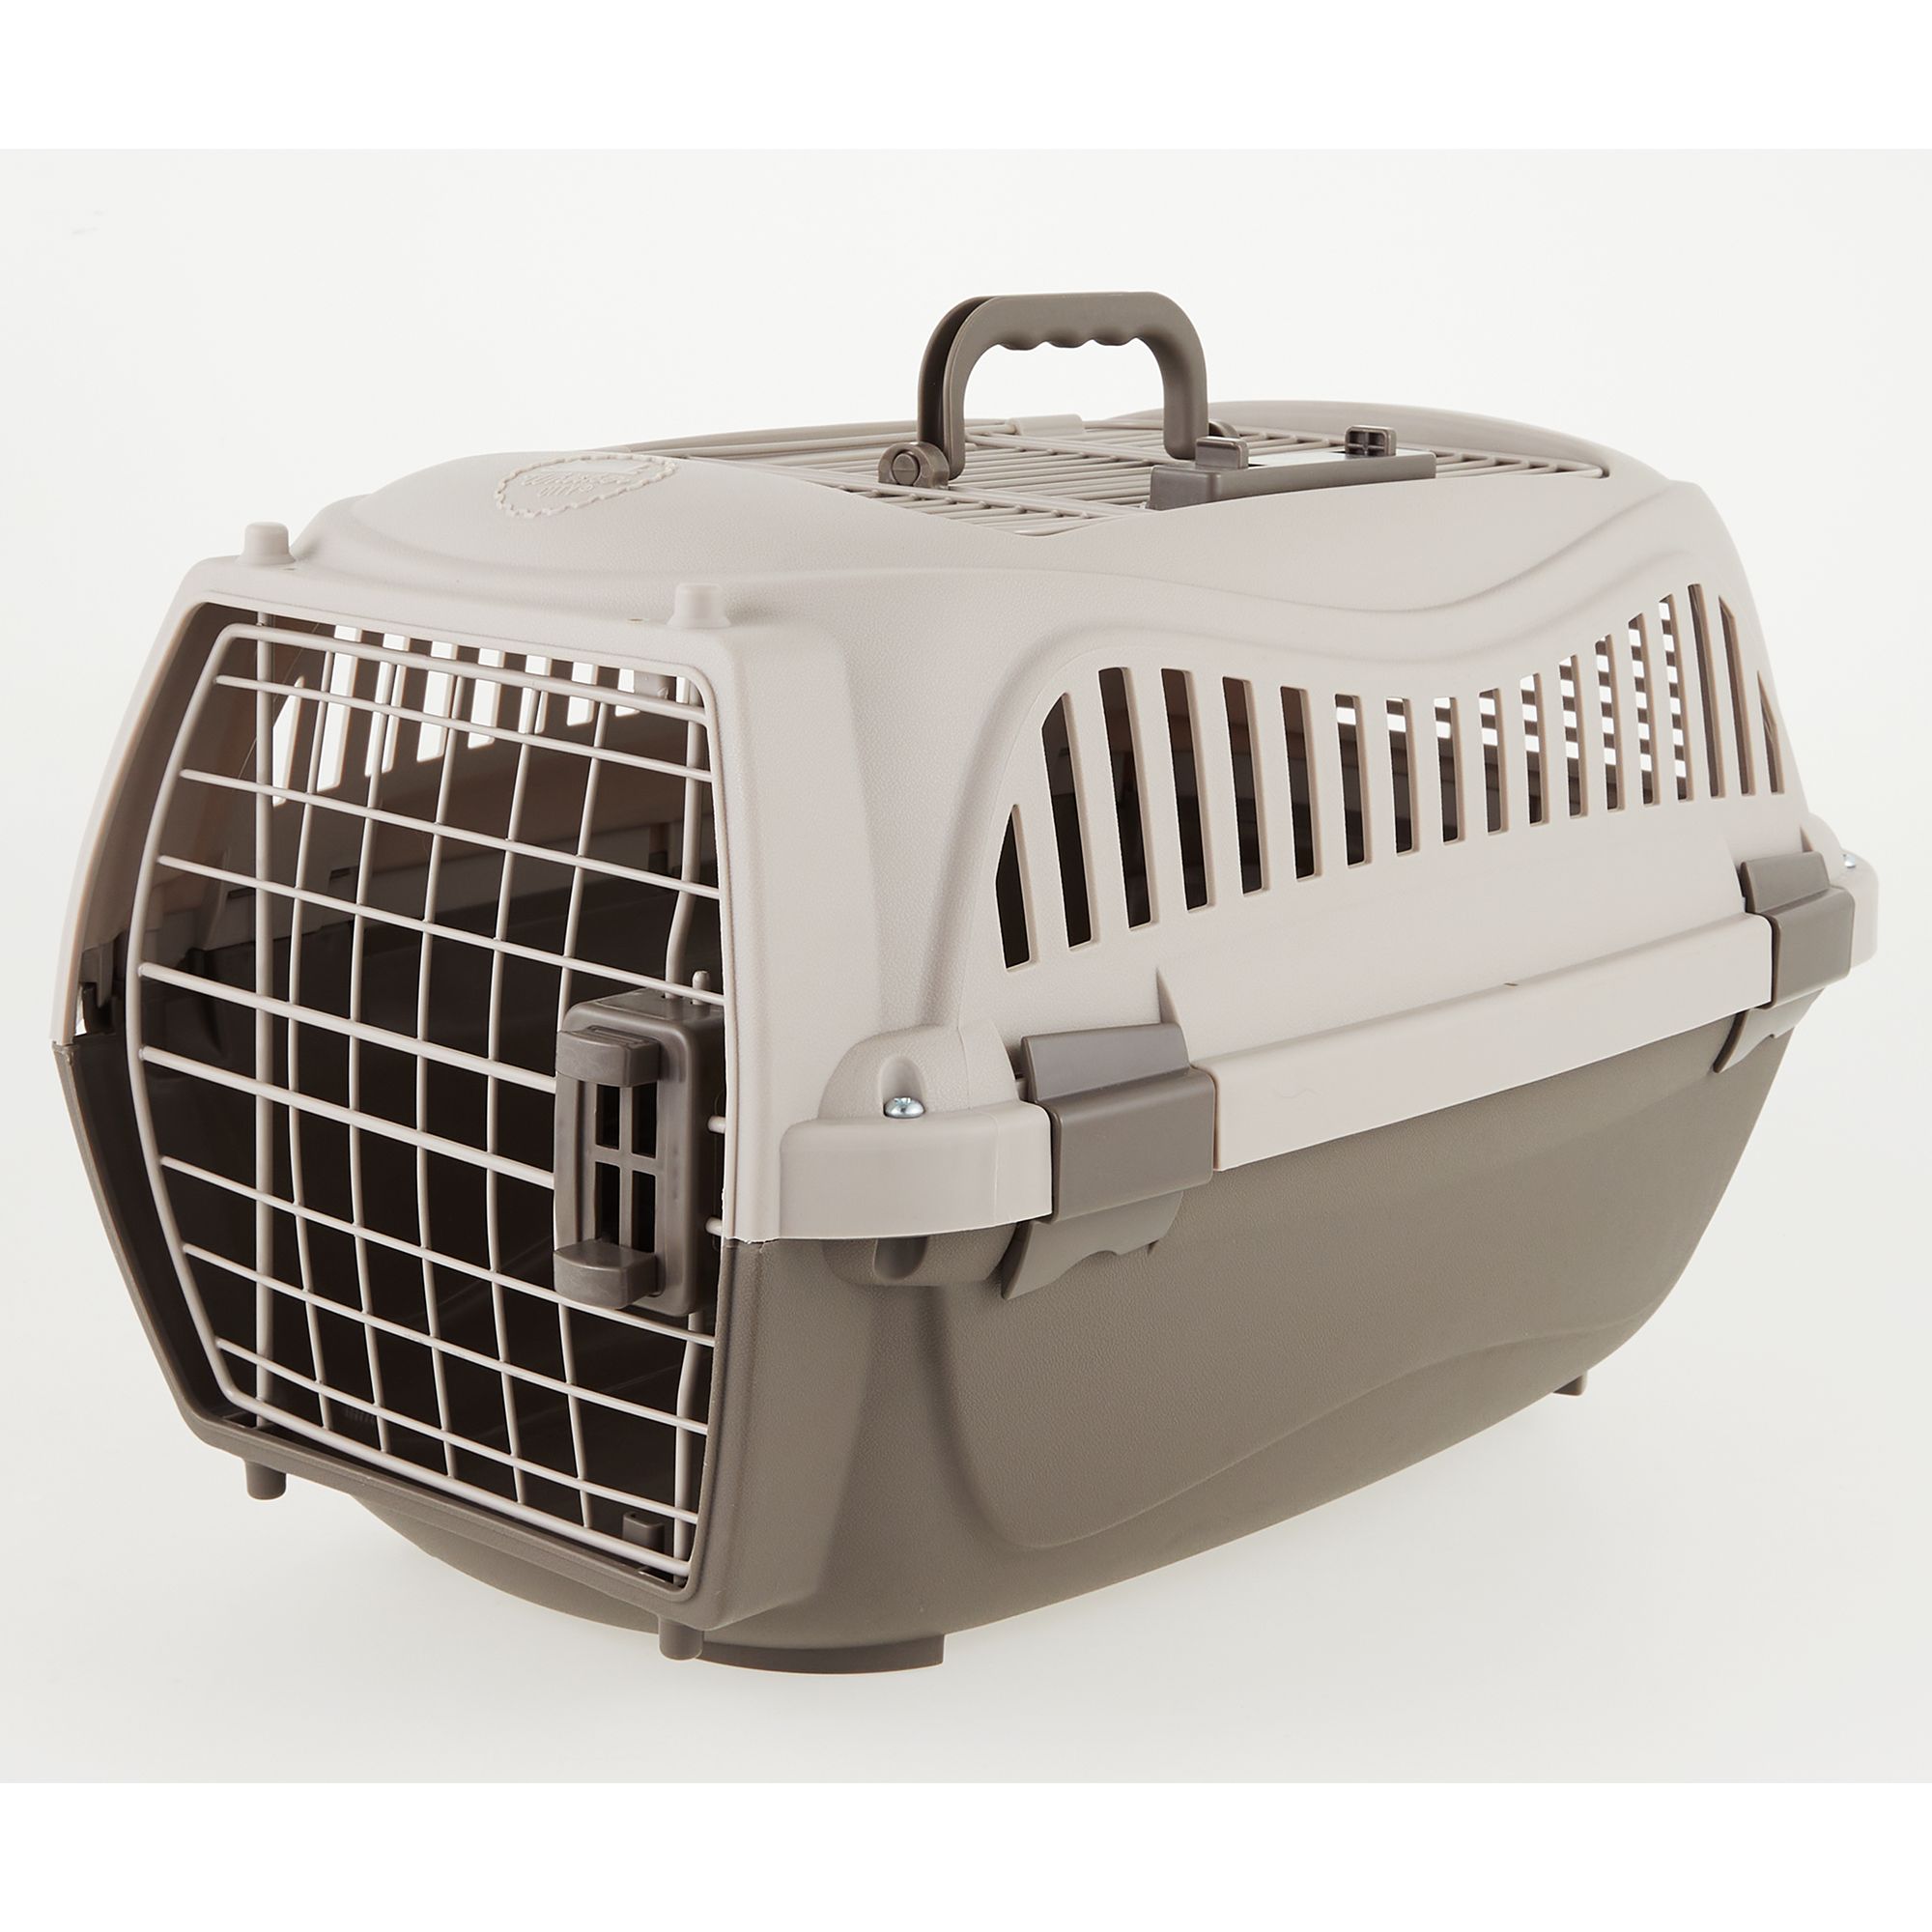 Whisker City Two Door Top Load Portable Kennel